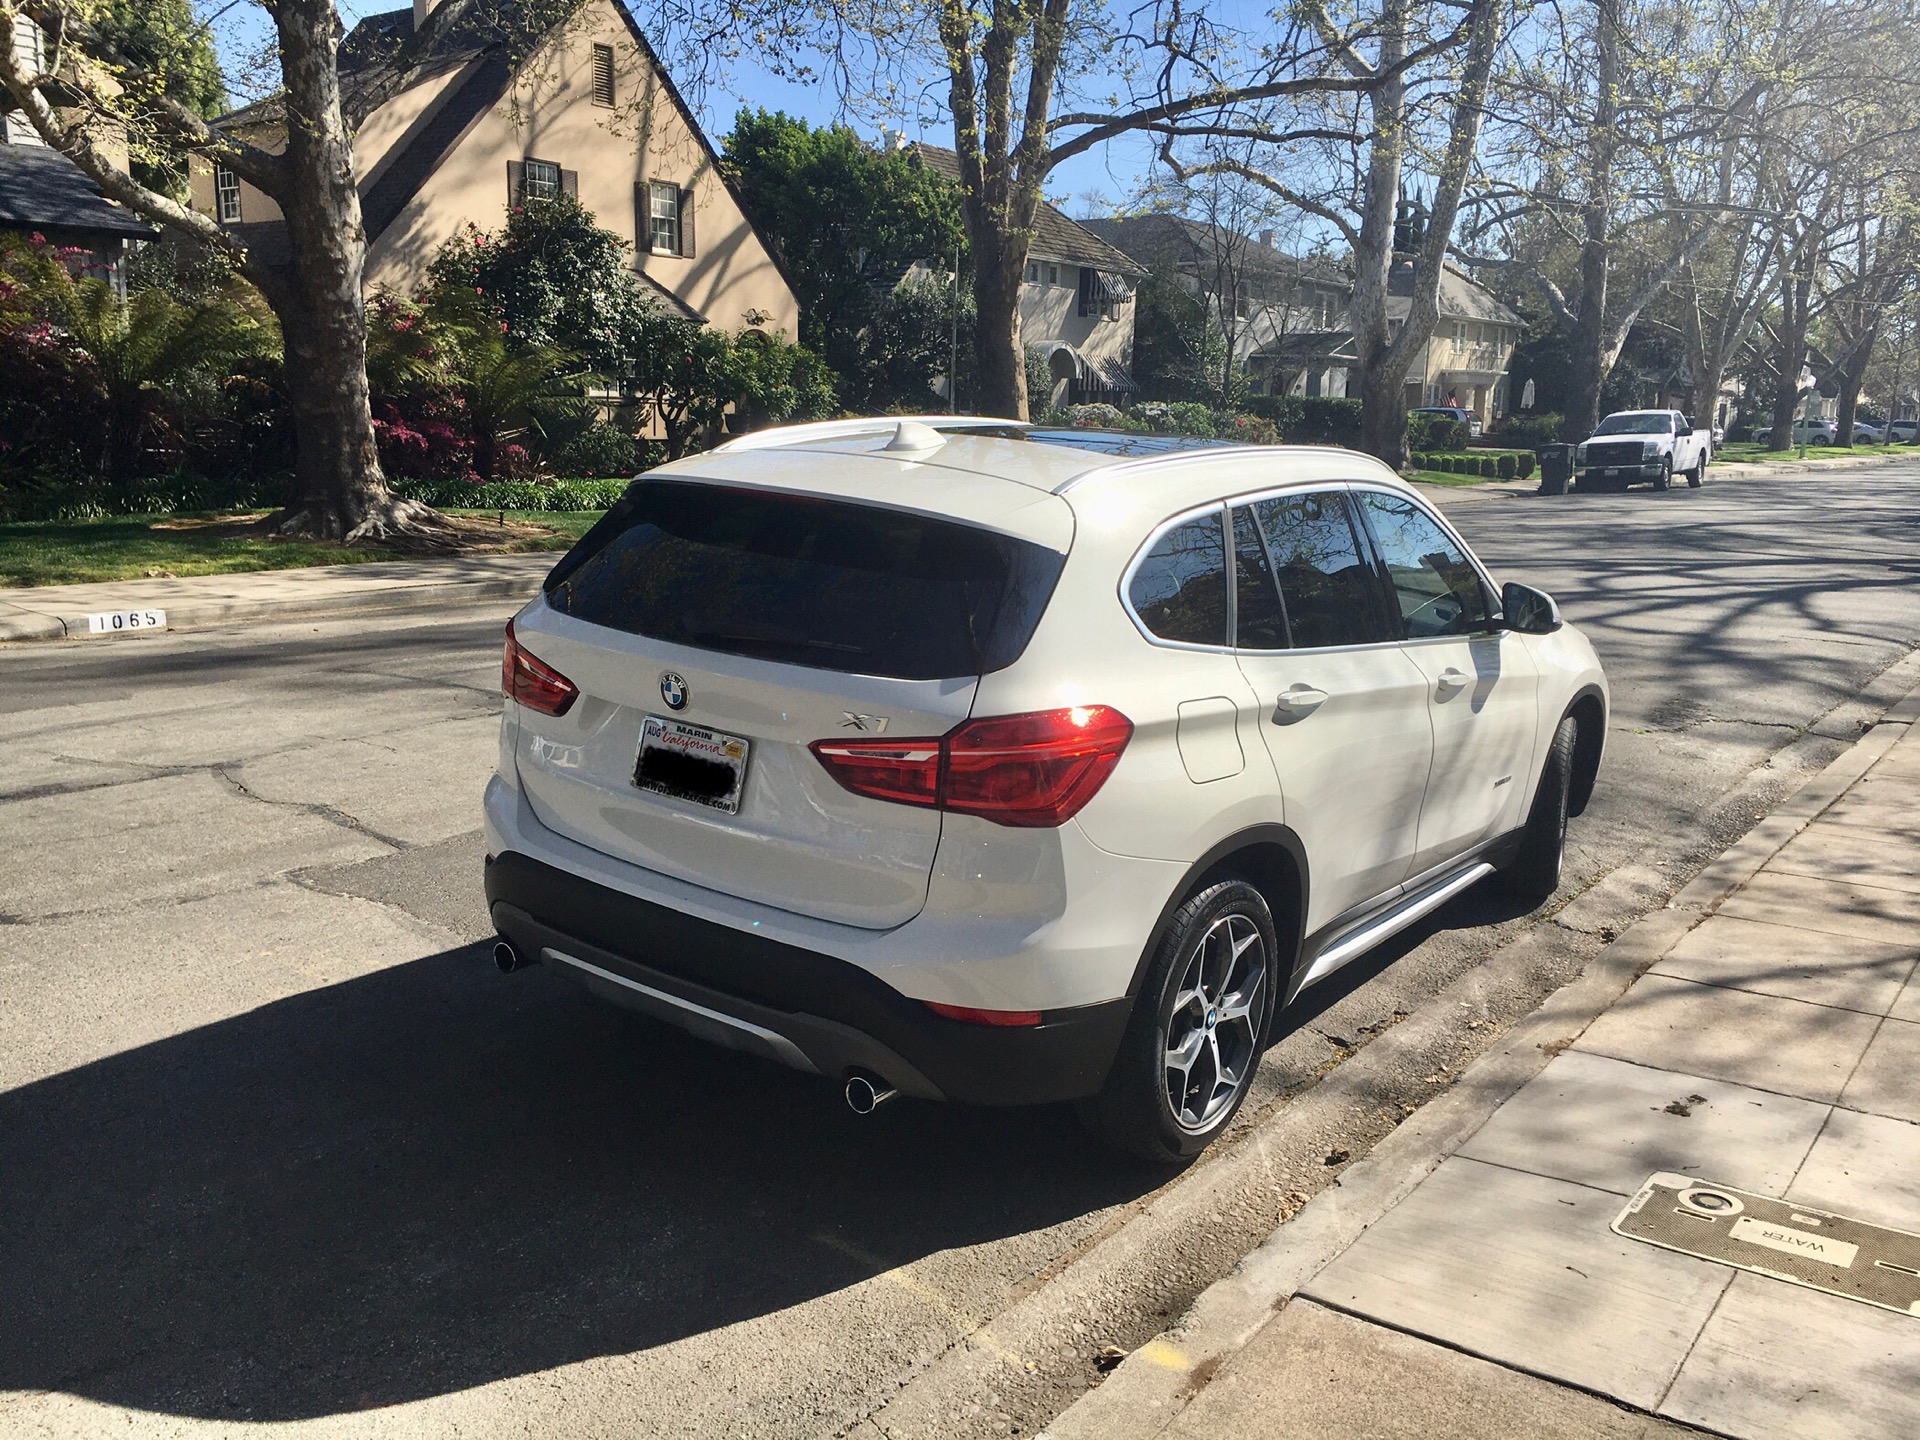 BMW X1 2018 Lease Deals in Sacramento, California | Current Offers